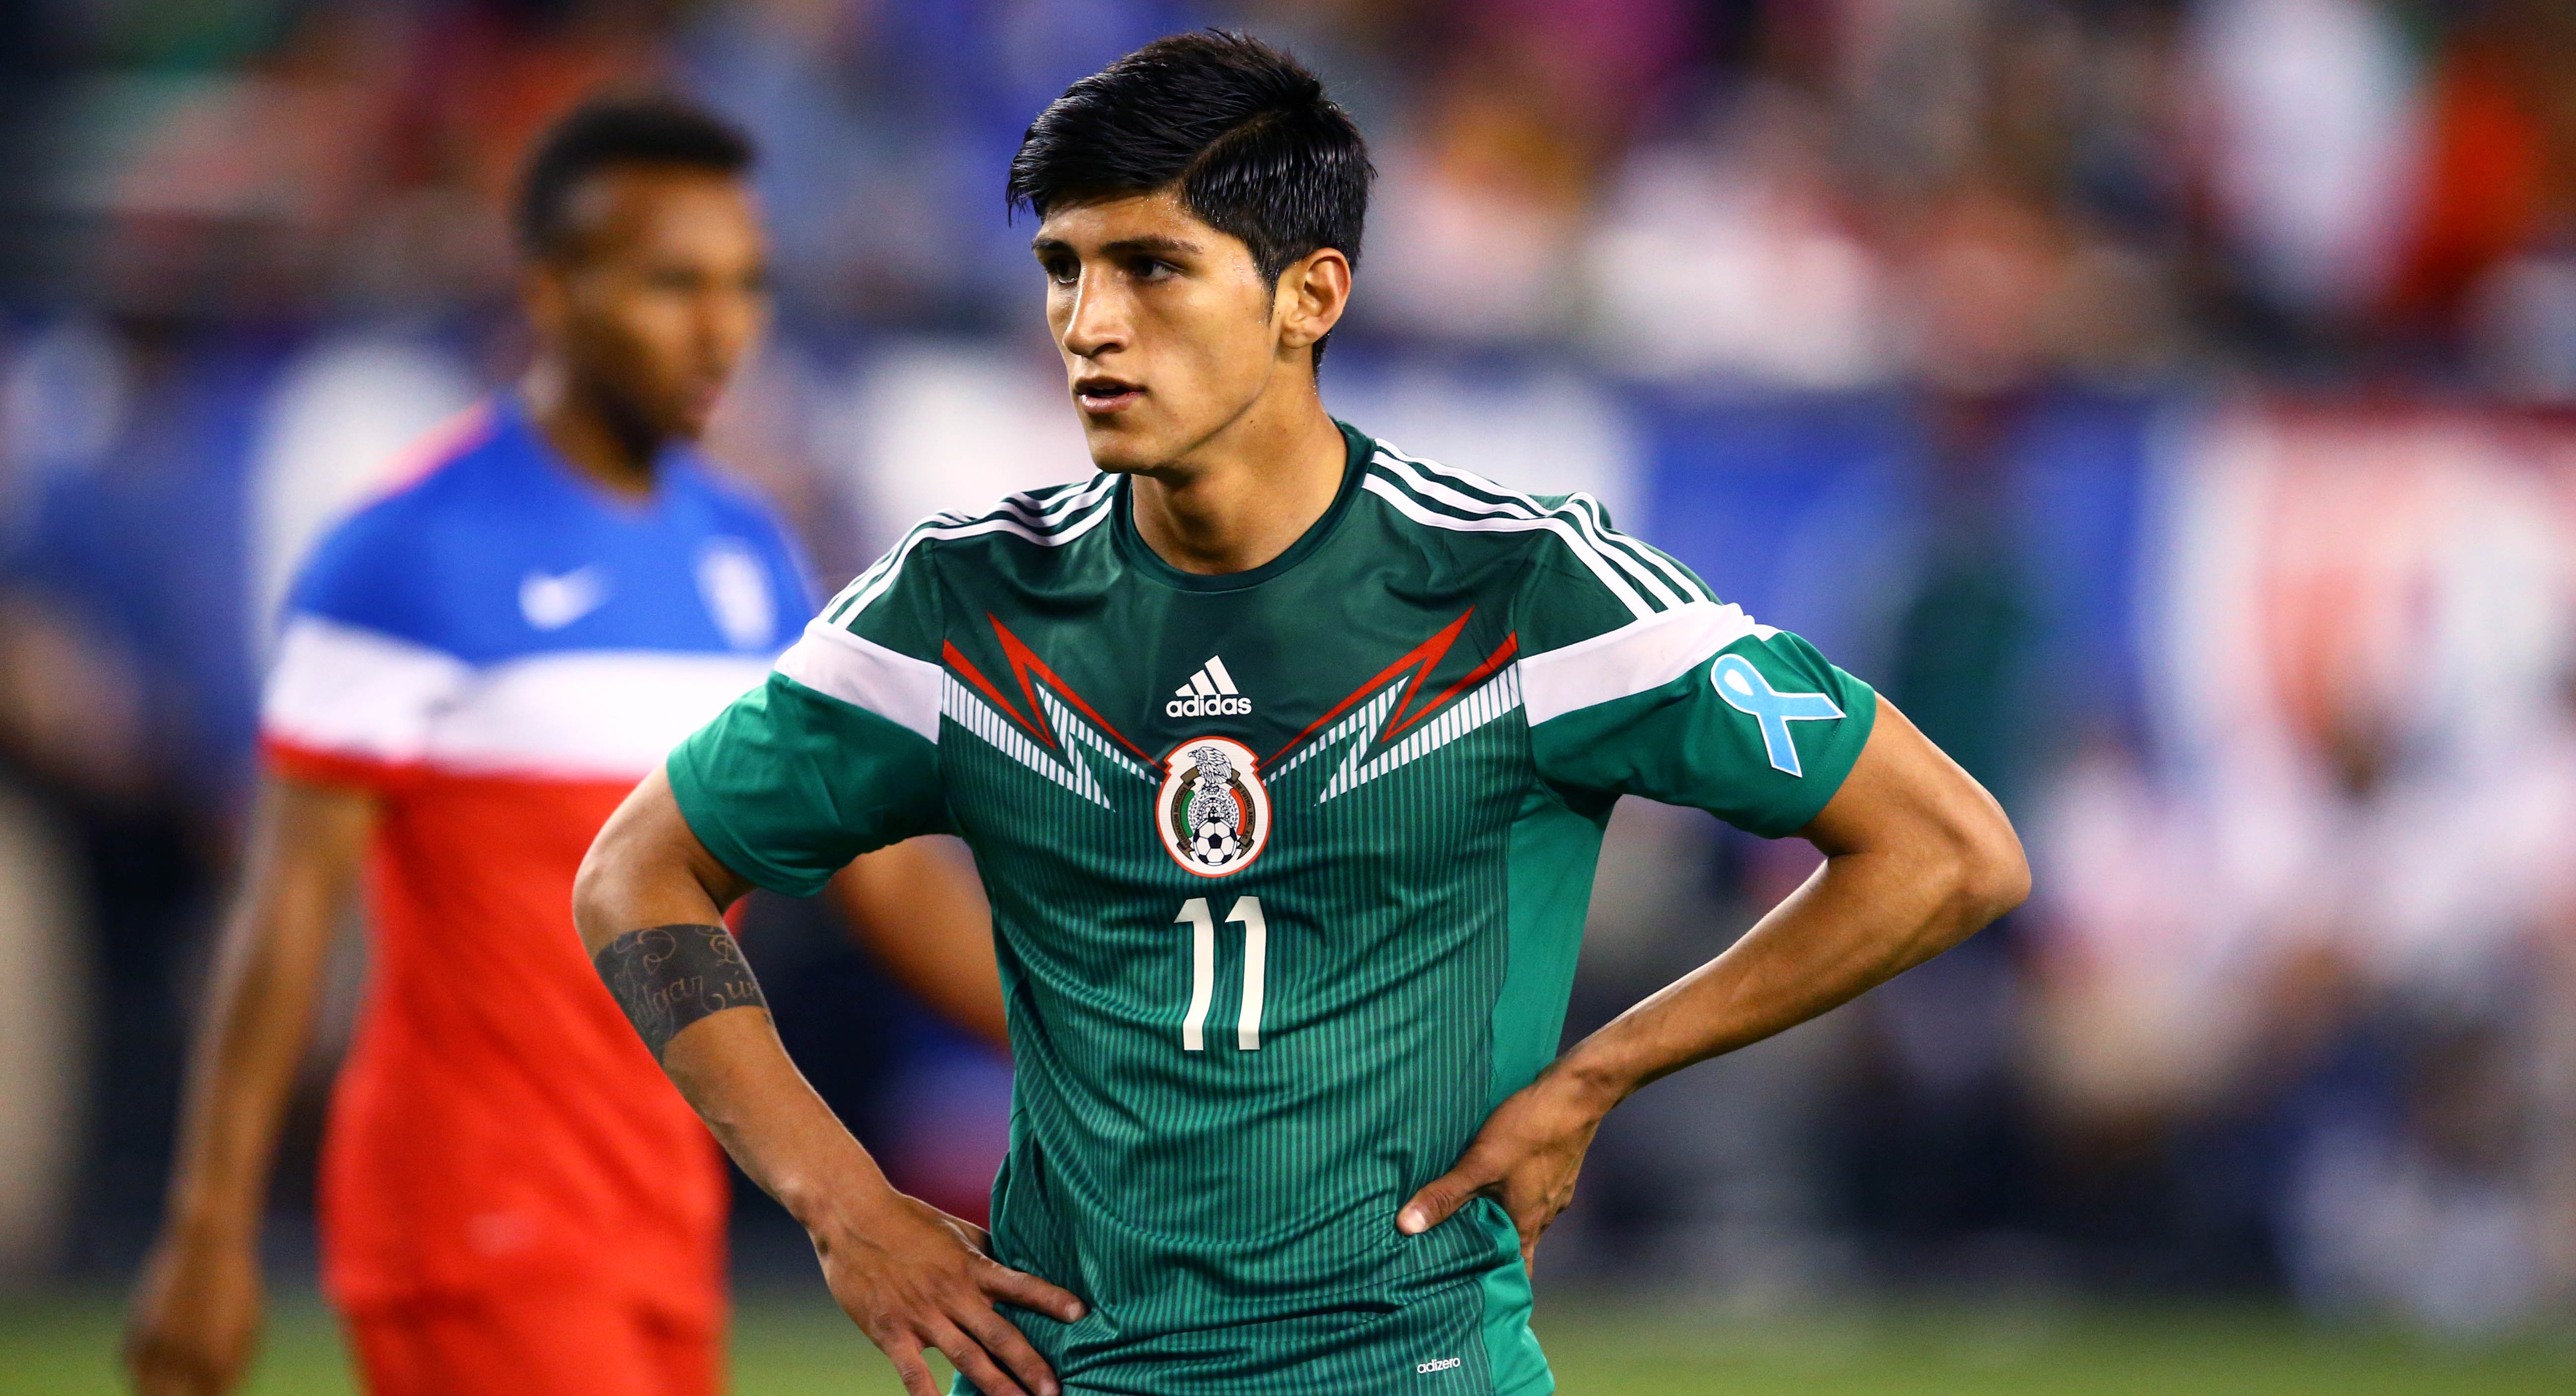 Mexico forward Alan Pulido playing against USA during a friendly match in 2014 (Credit: Mark J. Rebilas/USA TODAY)